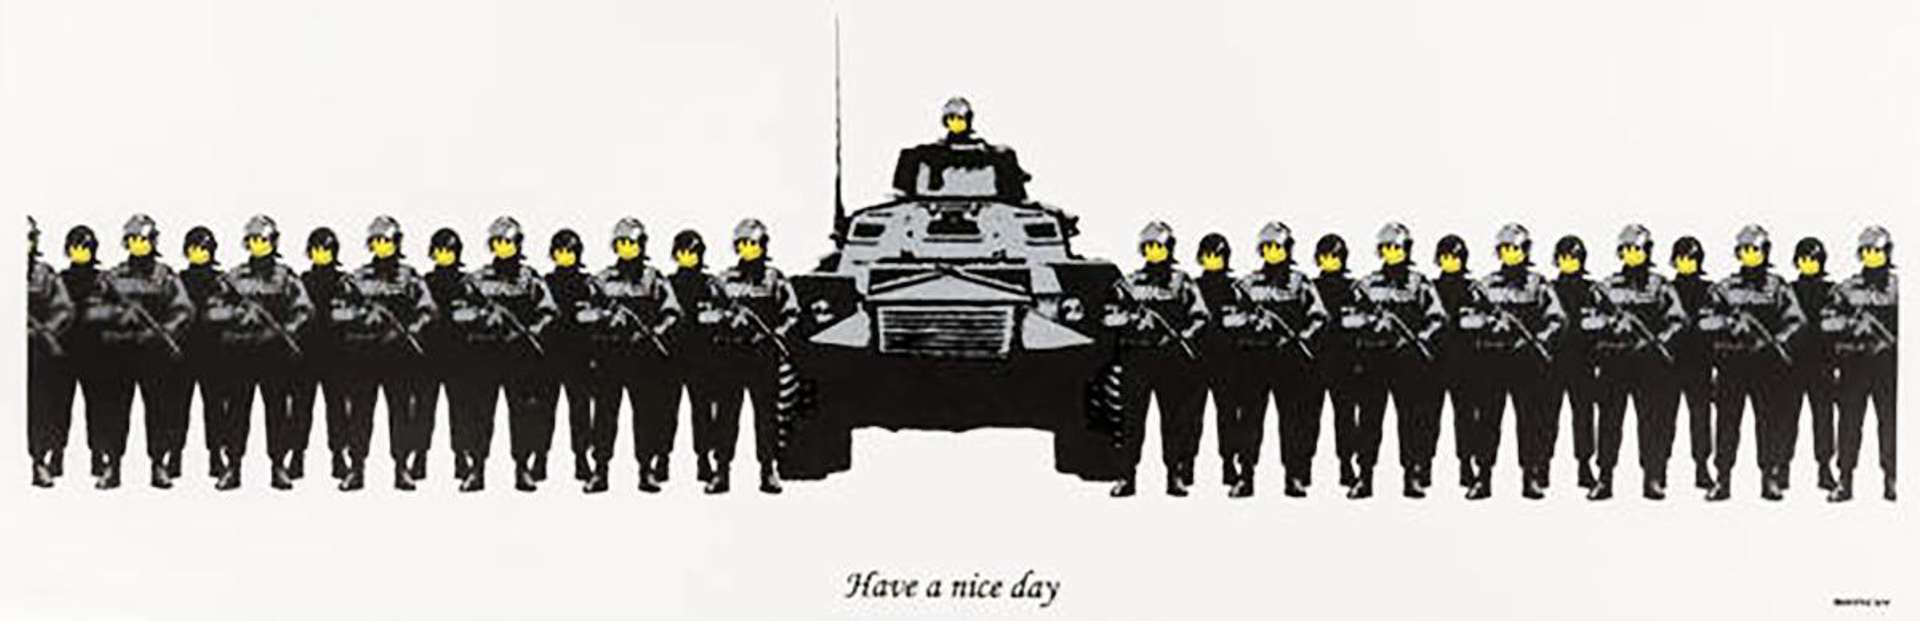 Have A Nice Day by Banksy